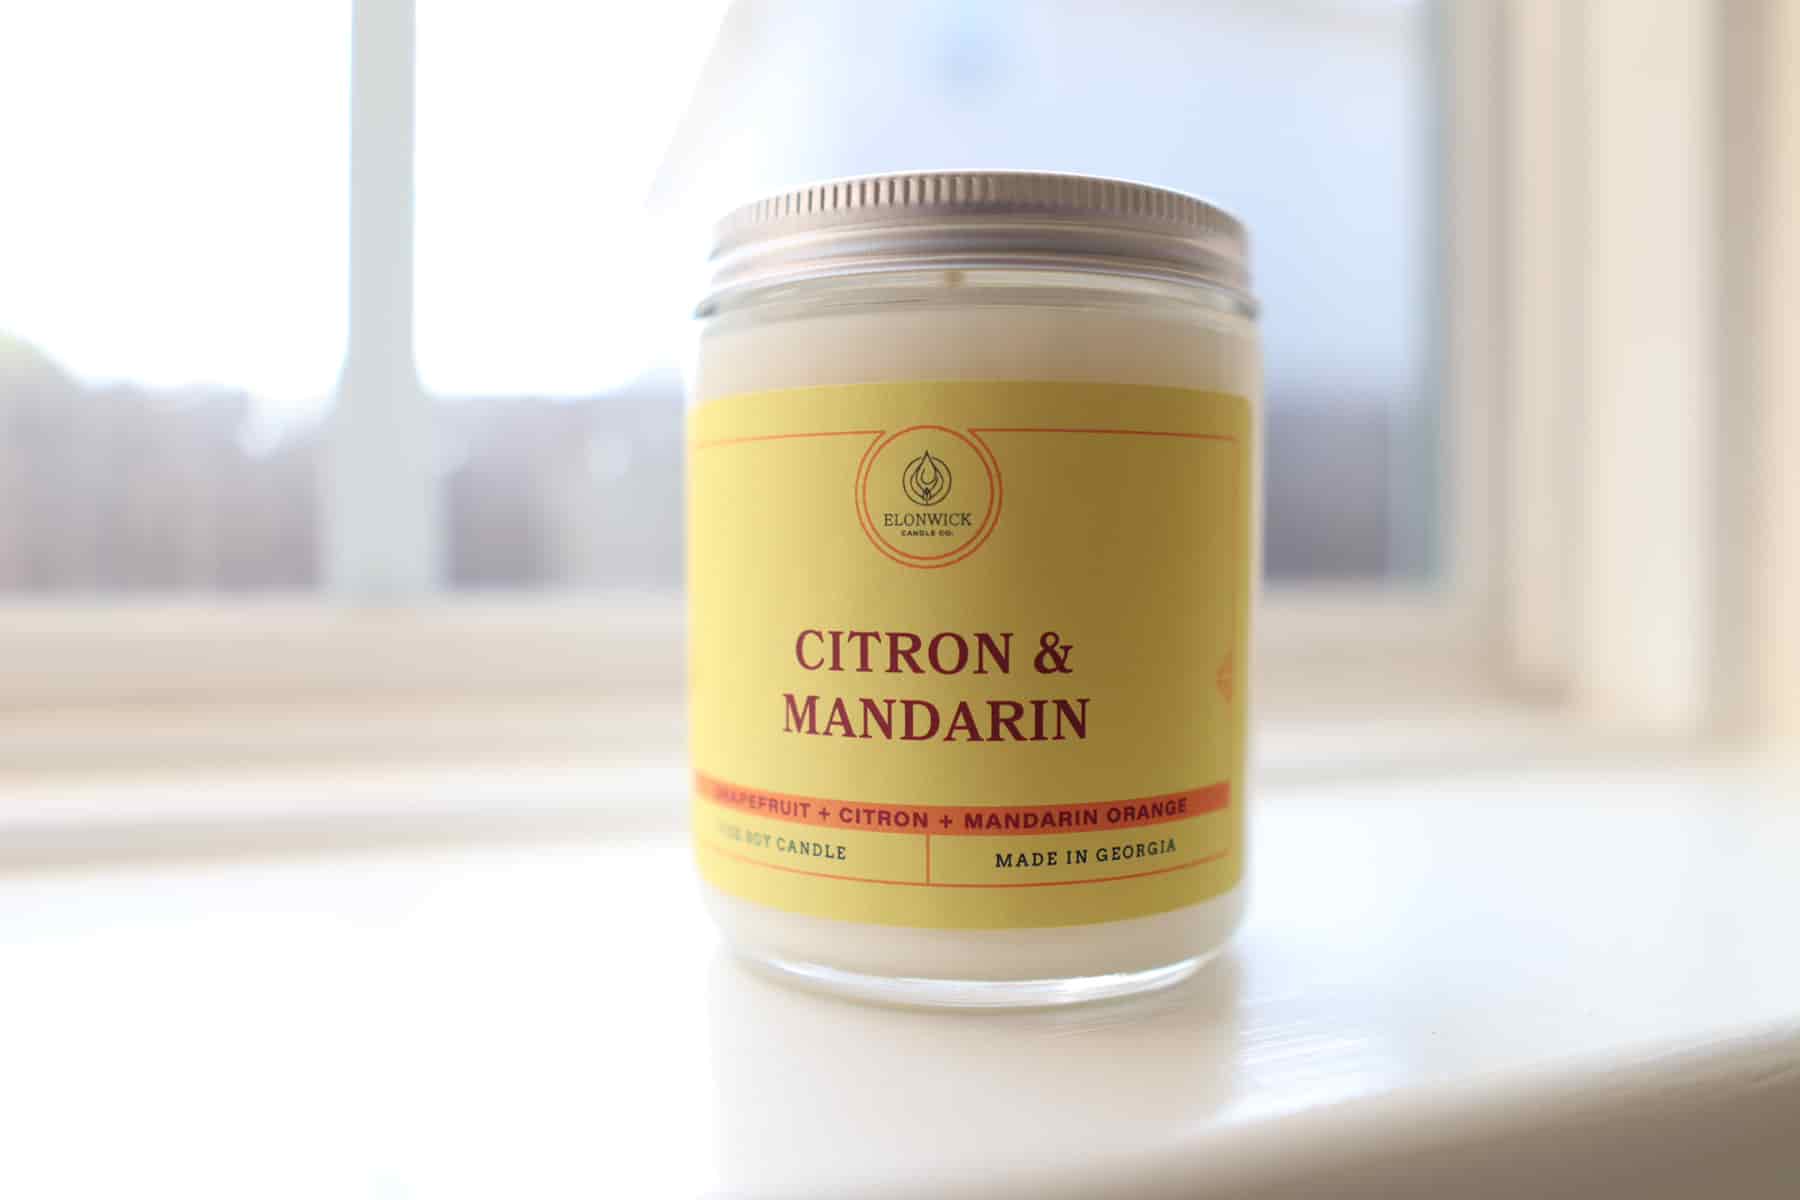 Citron and Mandarin scented candle from Elonwick